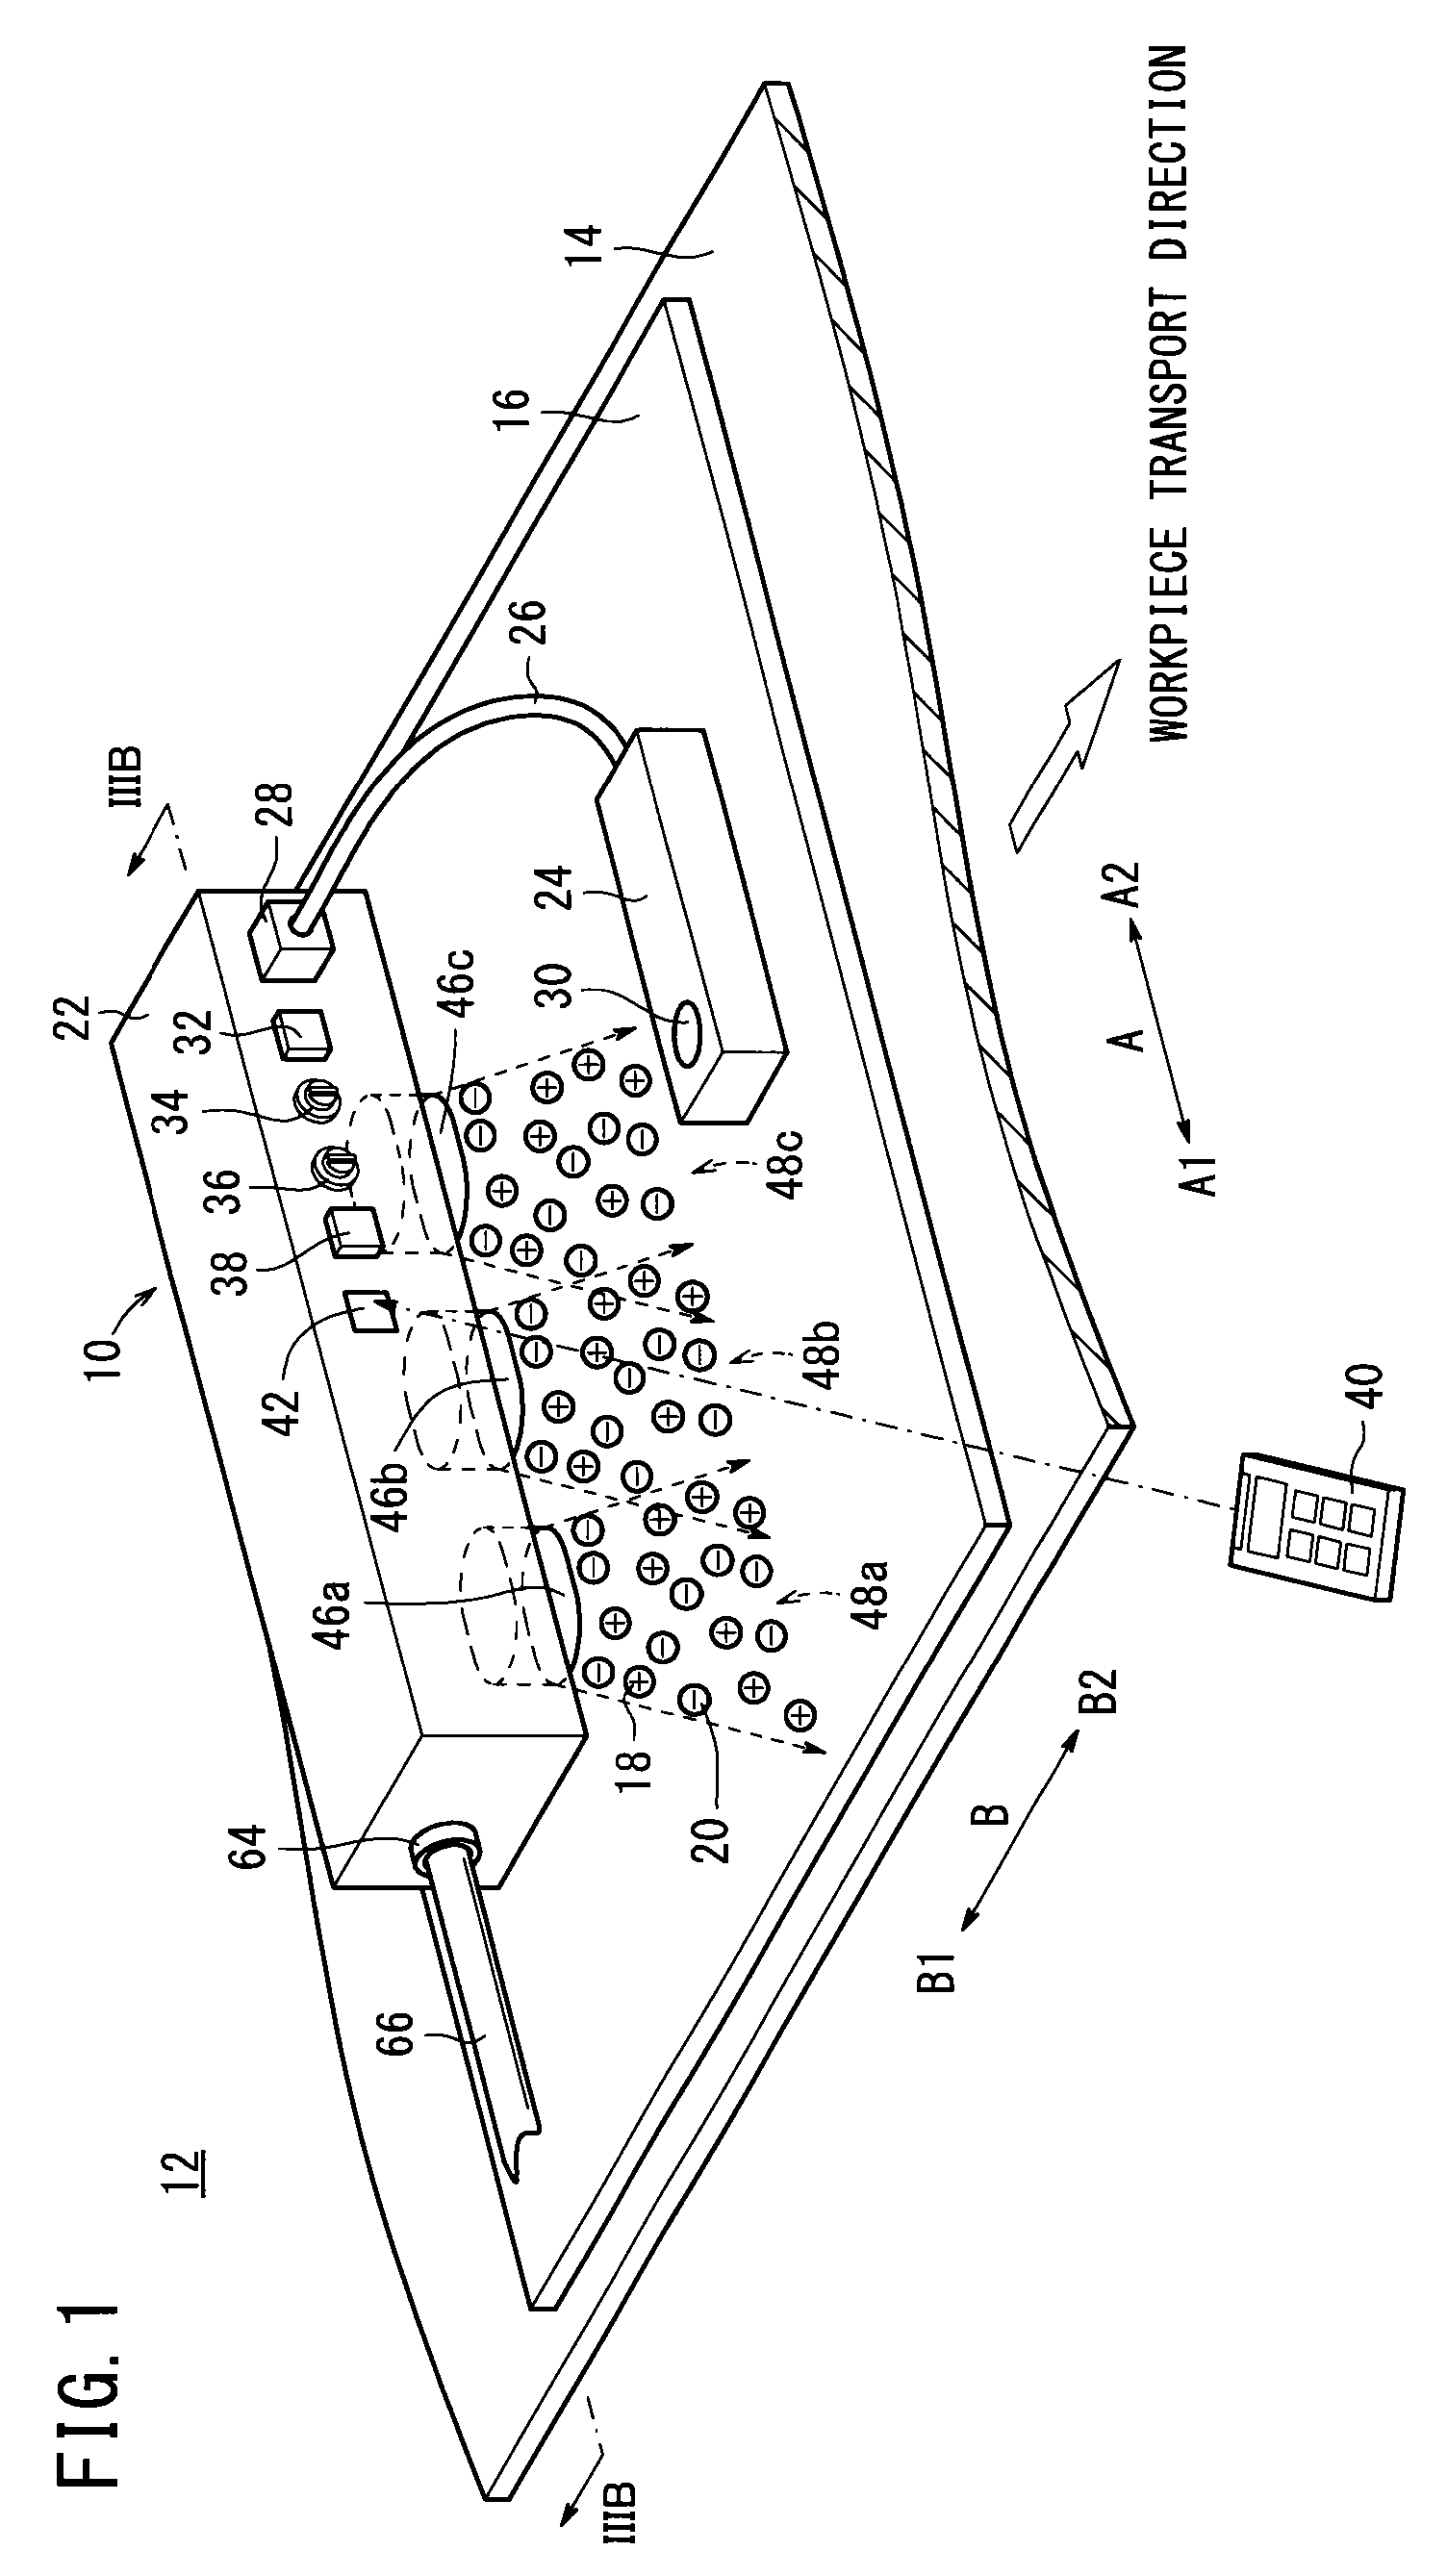 Electric charge generating device